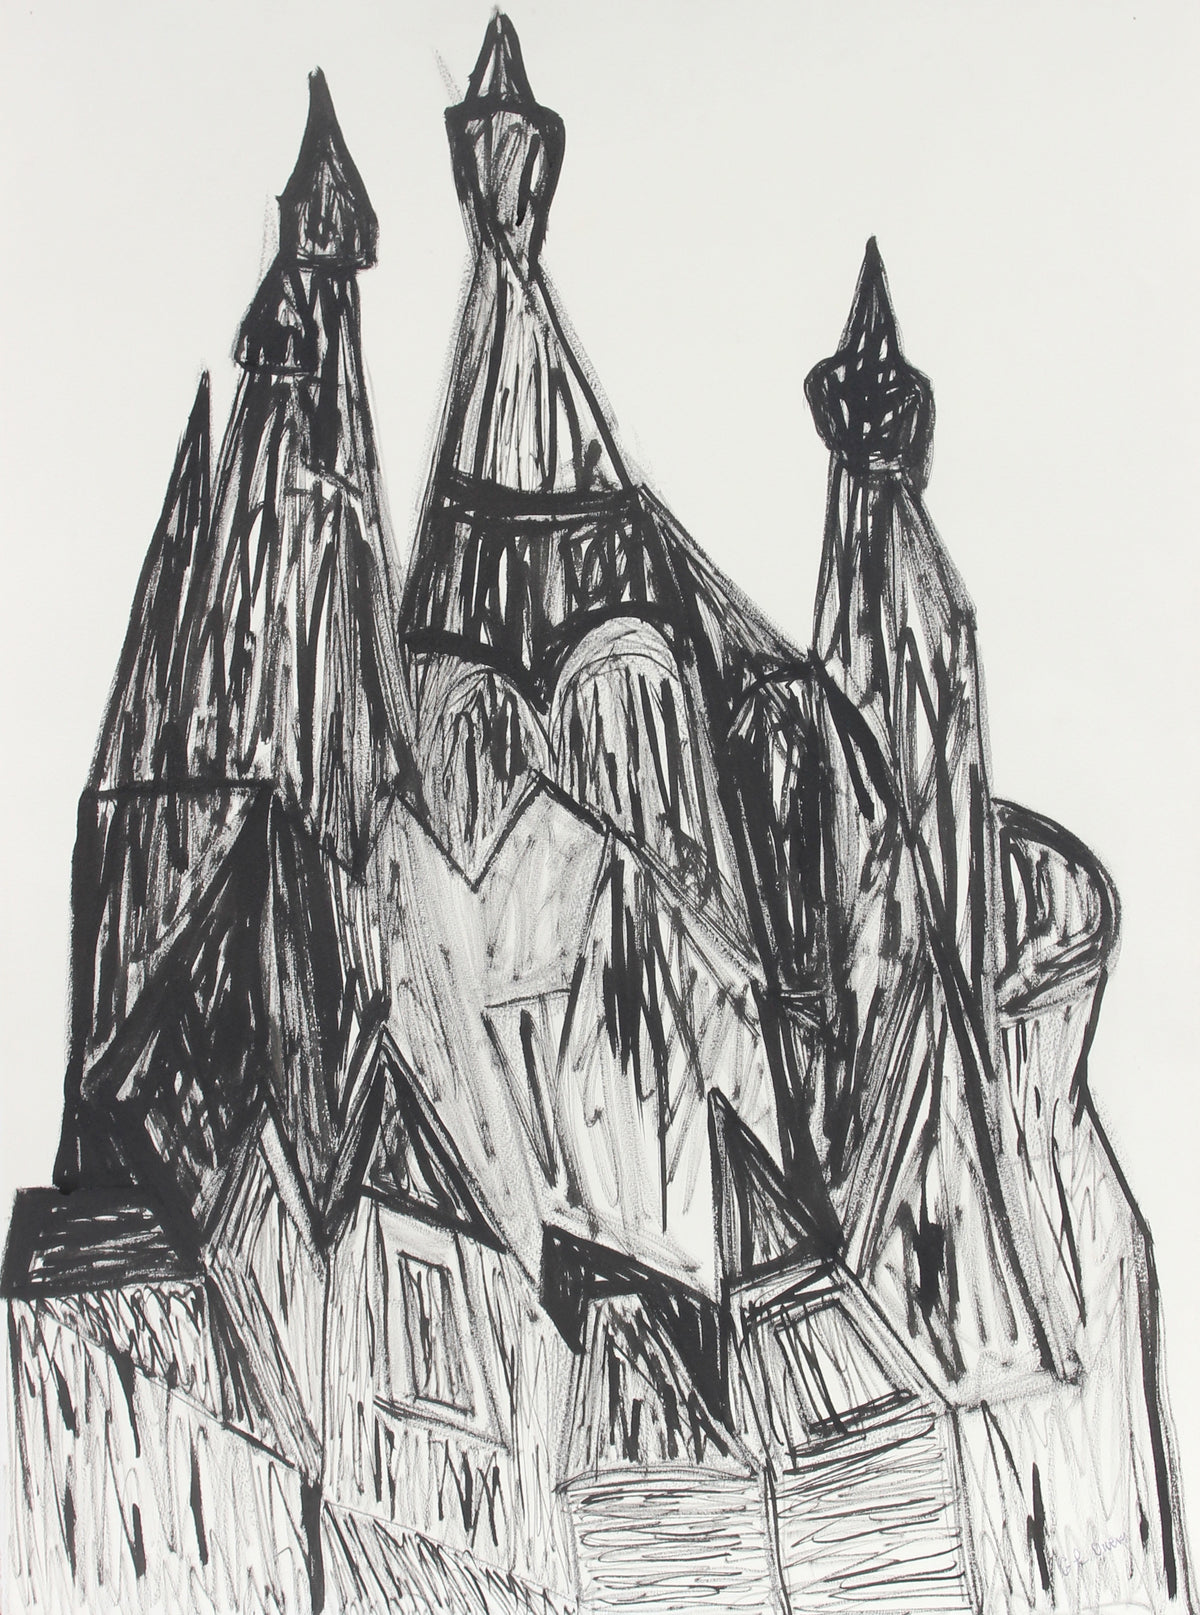 &lt;i&gt;Russian Churches in St. Petersburg&lt;/i&gt;&lt;br&gt;Late 20th Century Ink &amp; Charcoal&lt;br&gt;&lt;br&gt;#93412